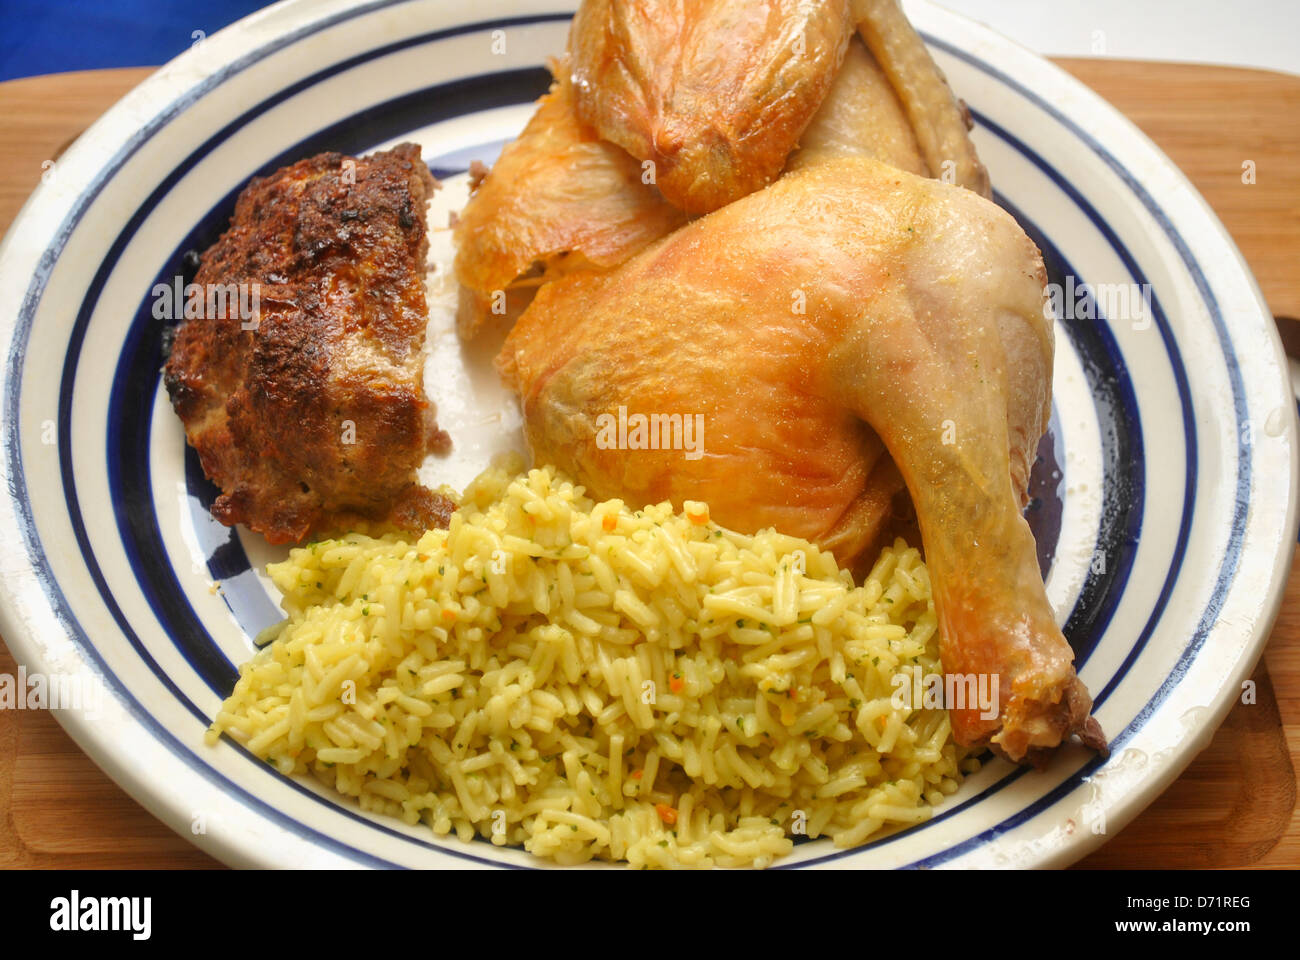 Healthy Chicken and Rice Dinner Stock Photo